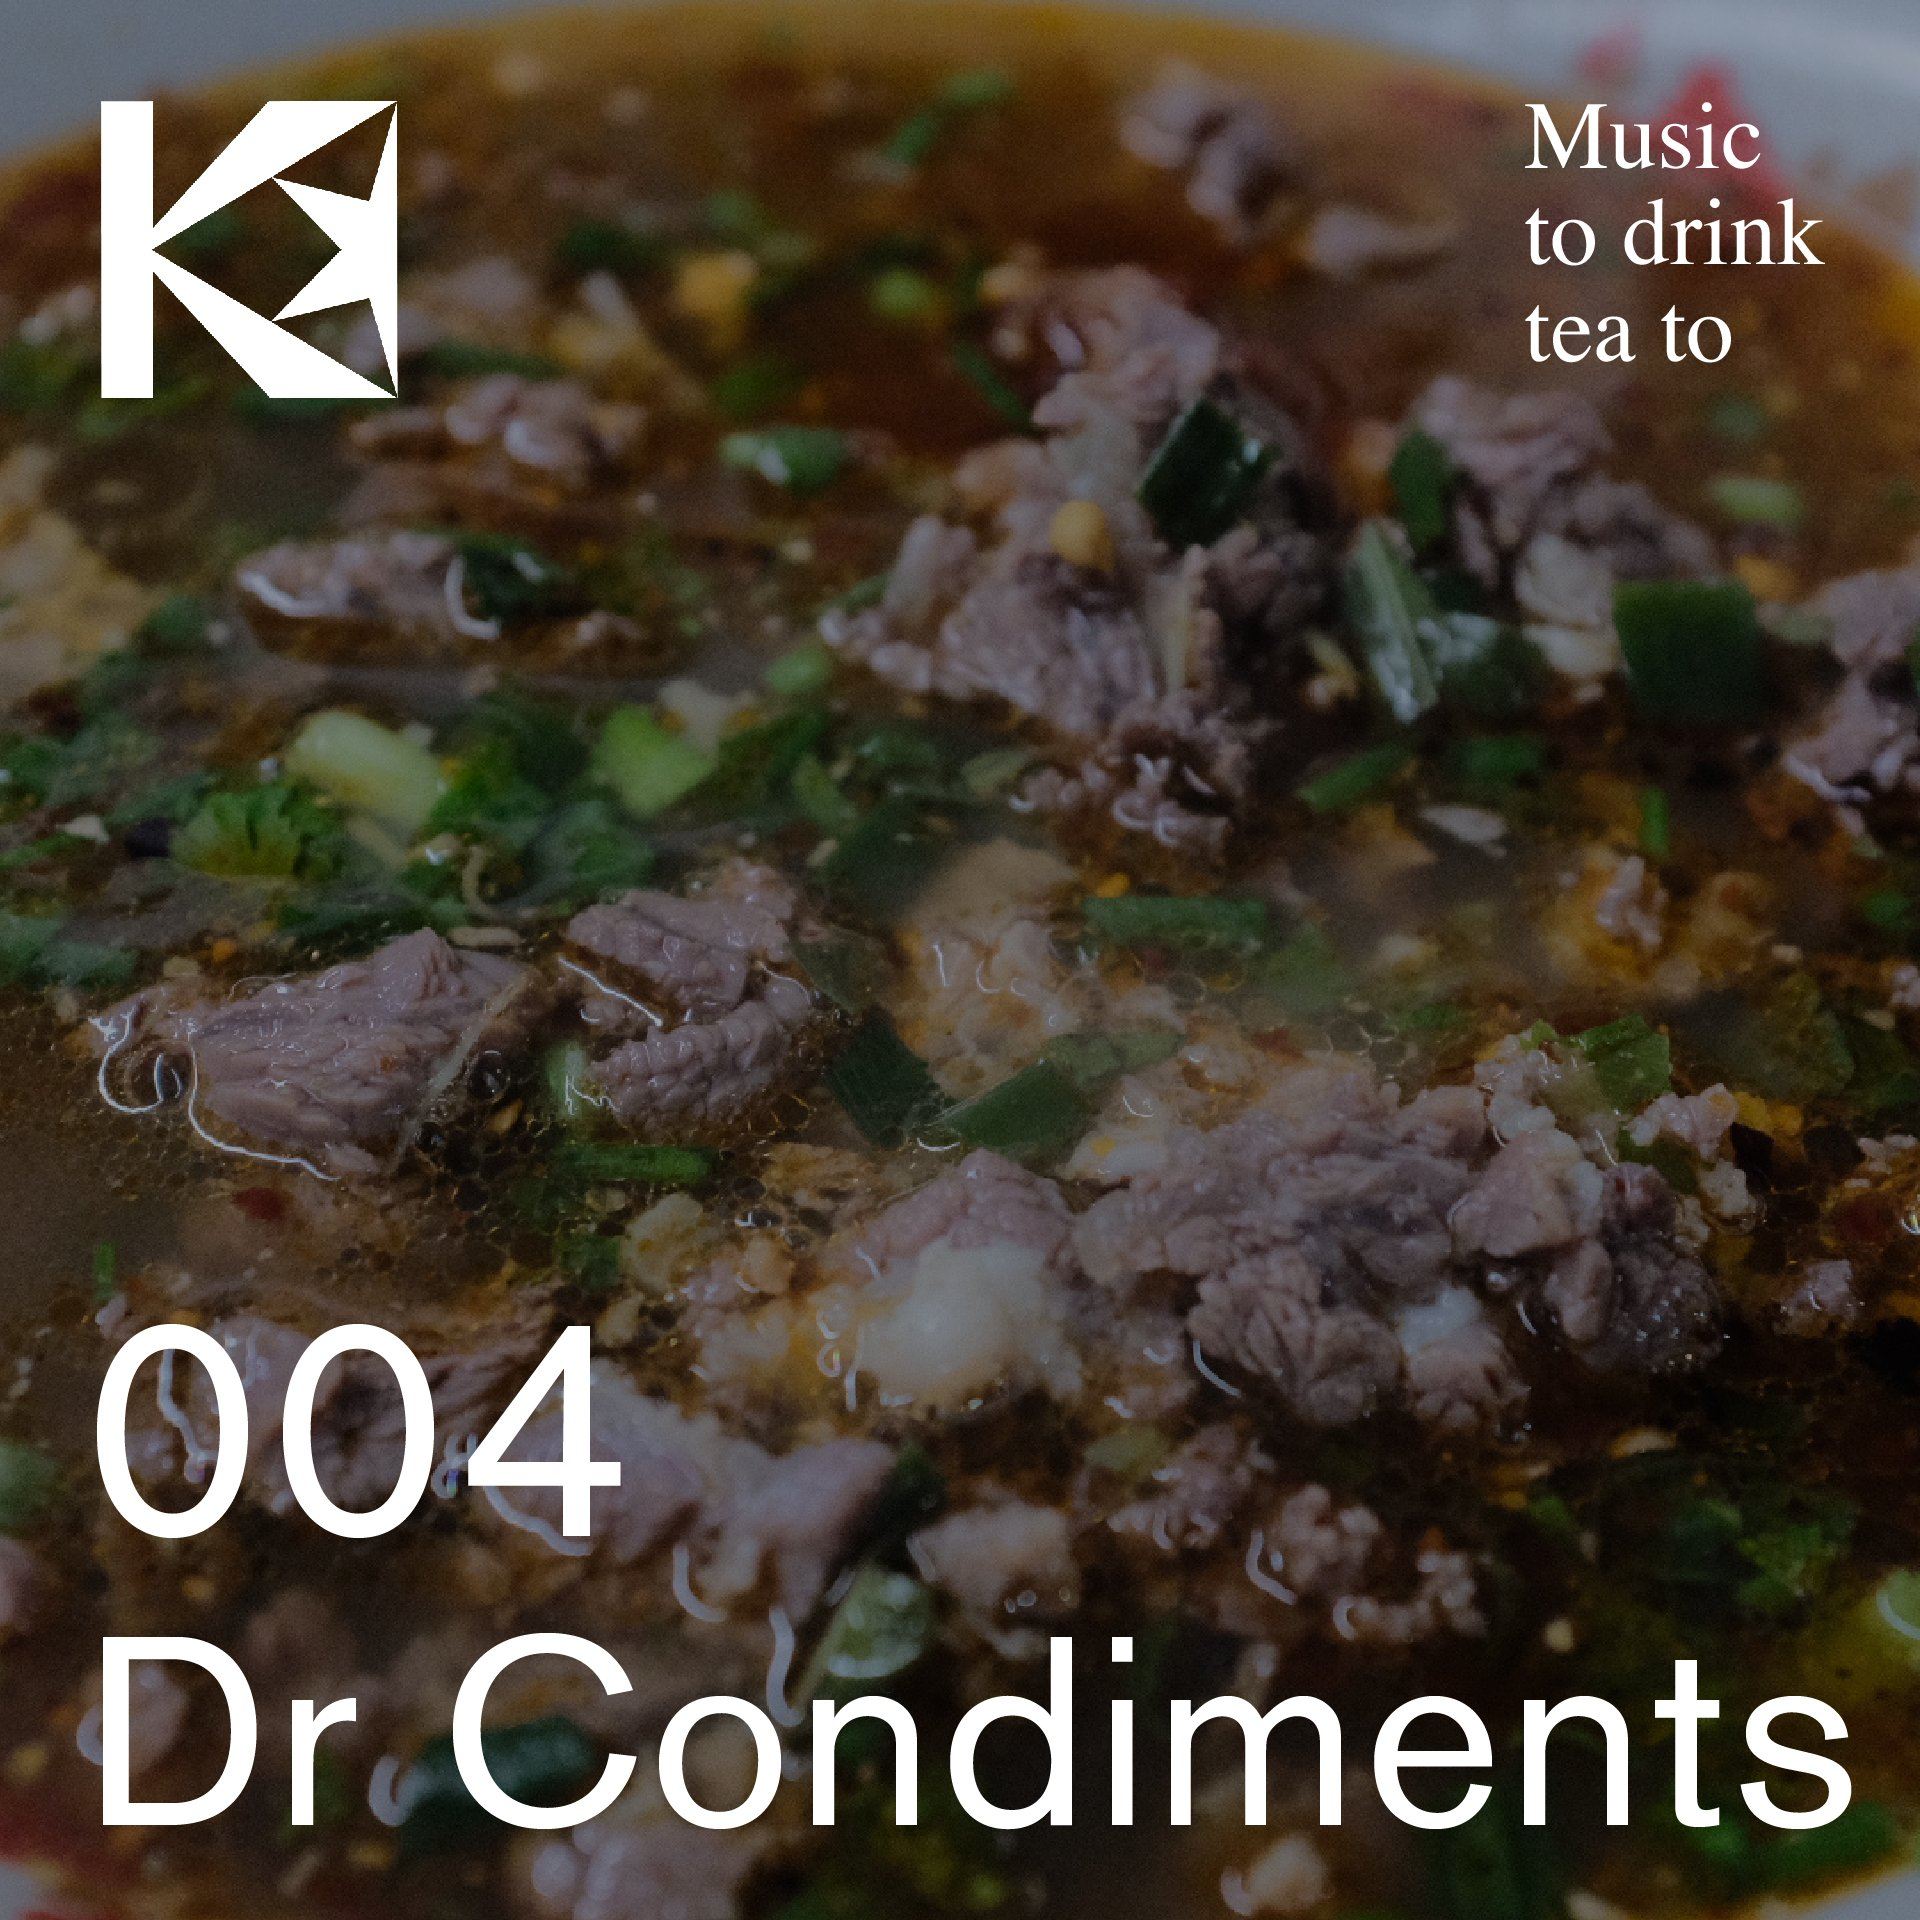 Music To Drink Tea To - 004 - Dr Condiments